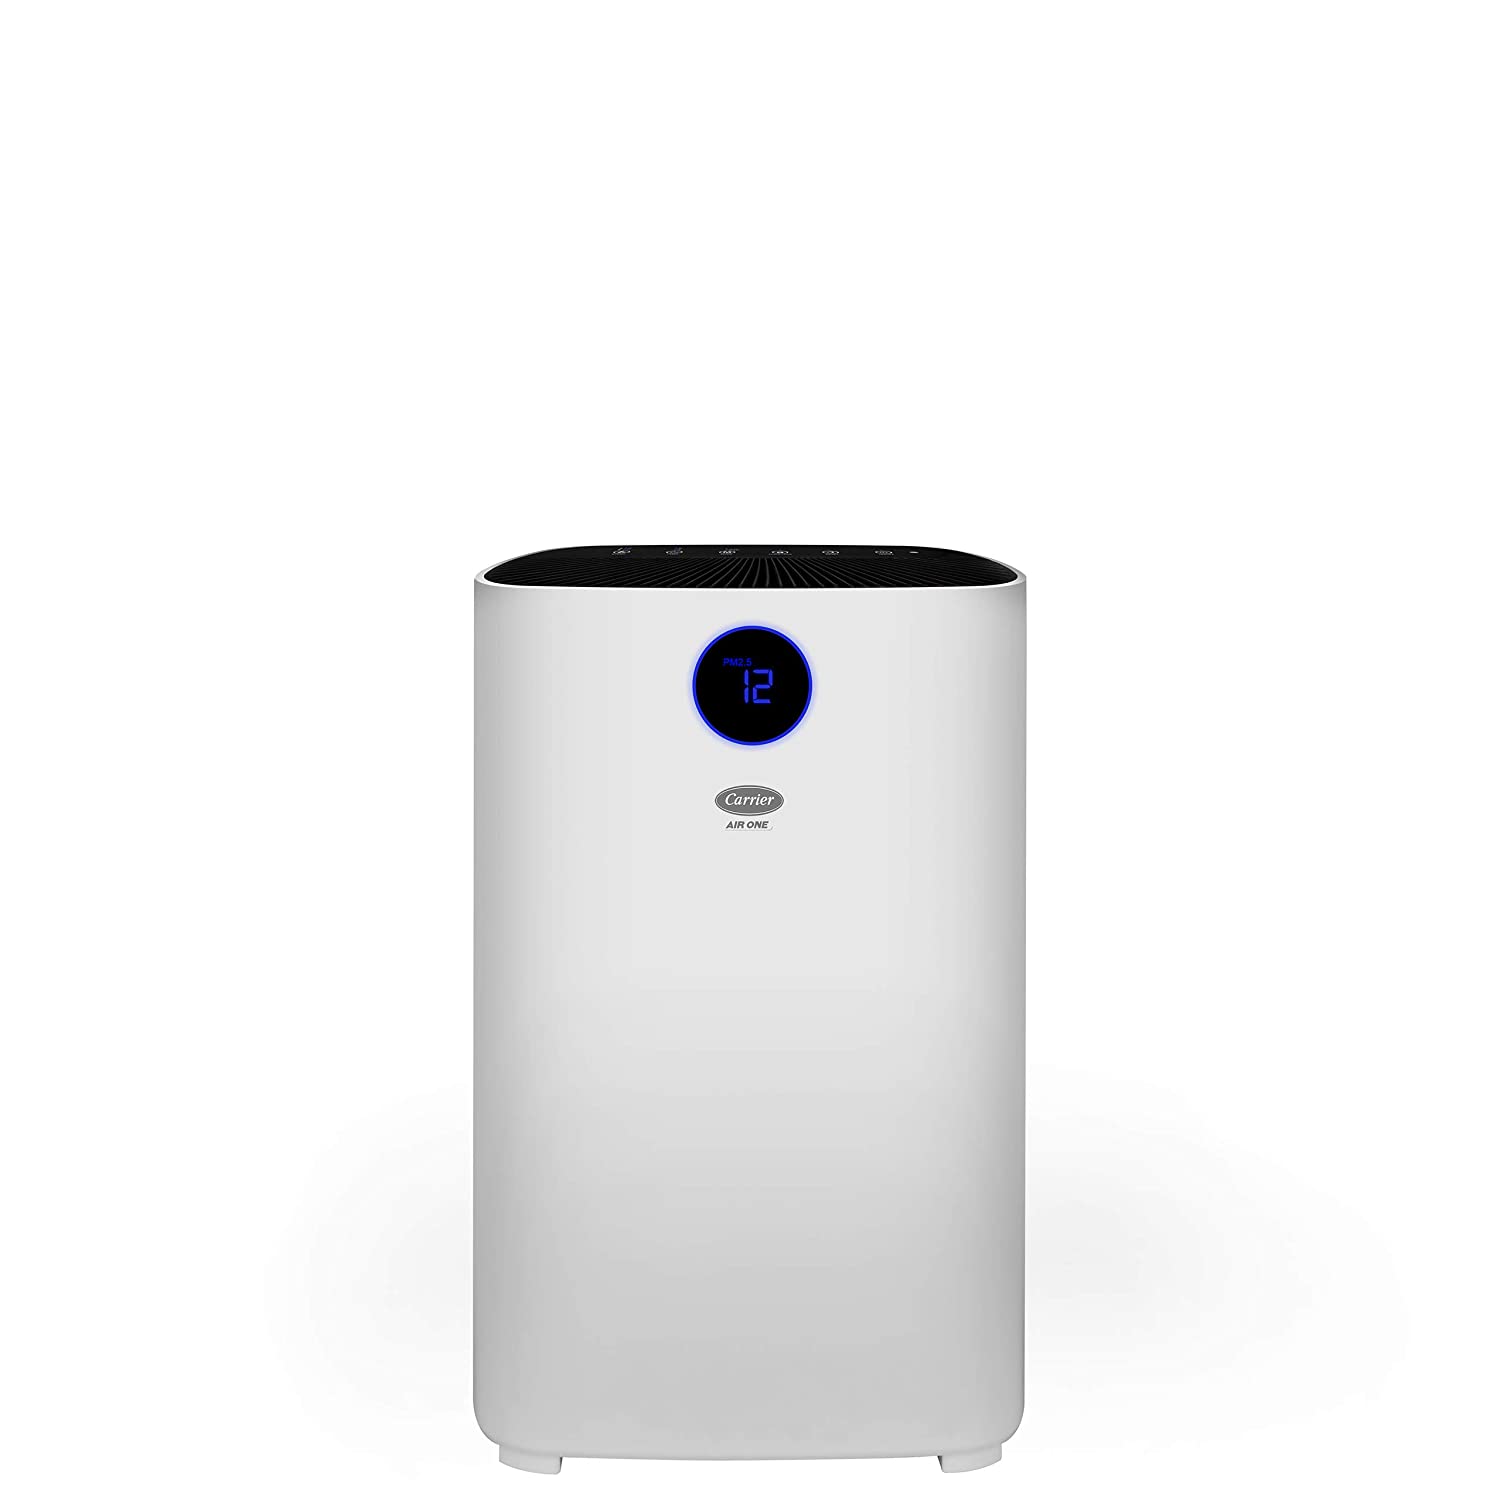 Carrier Air One Room Air Purifier review